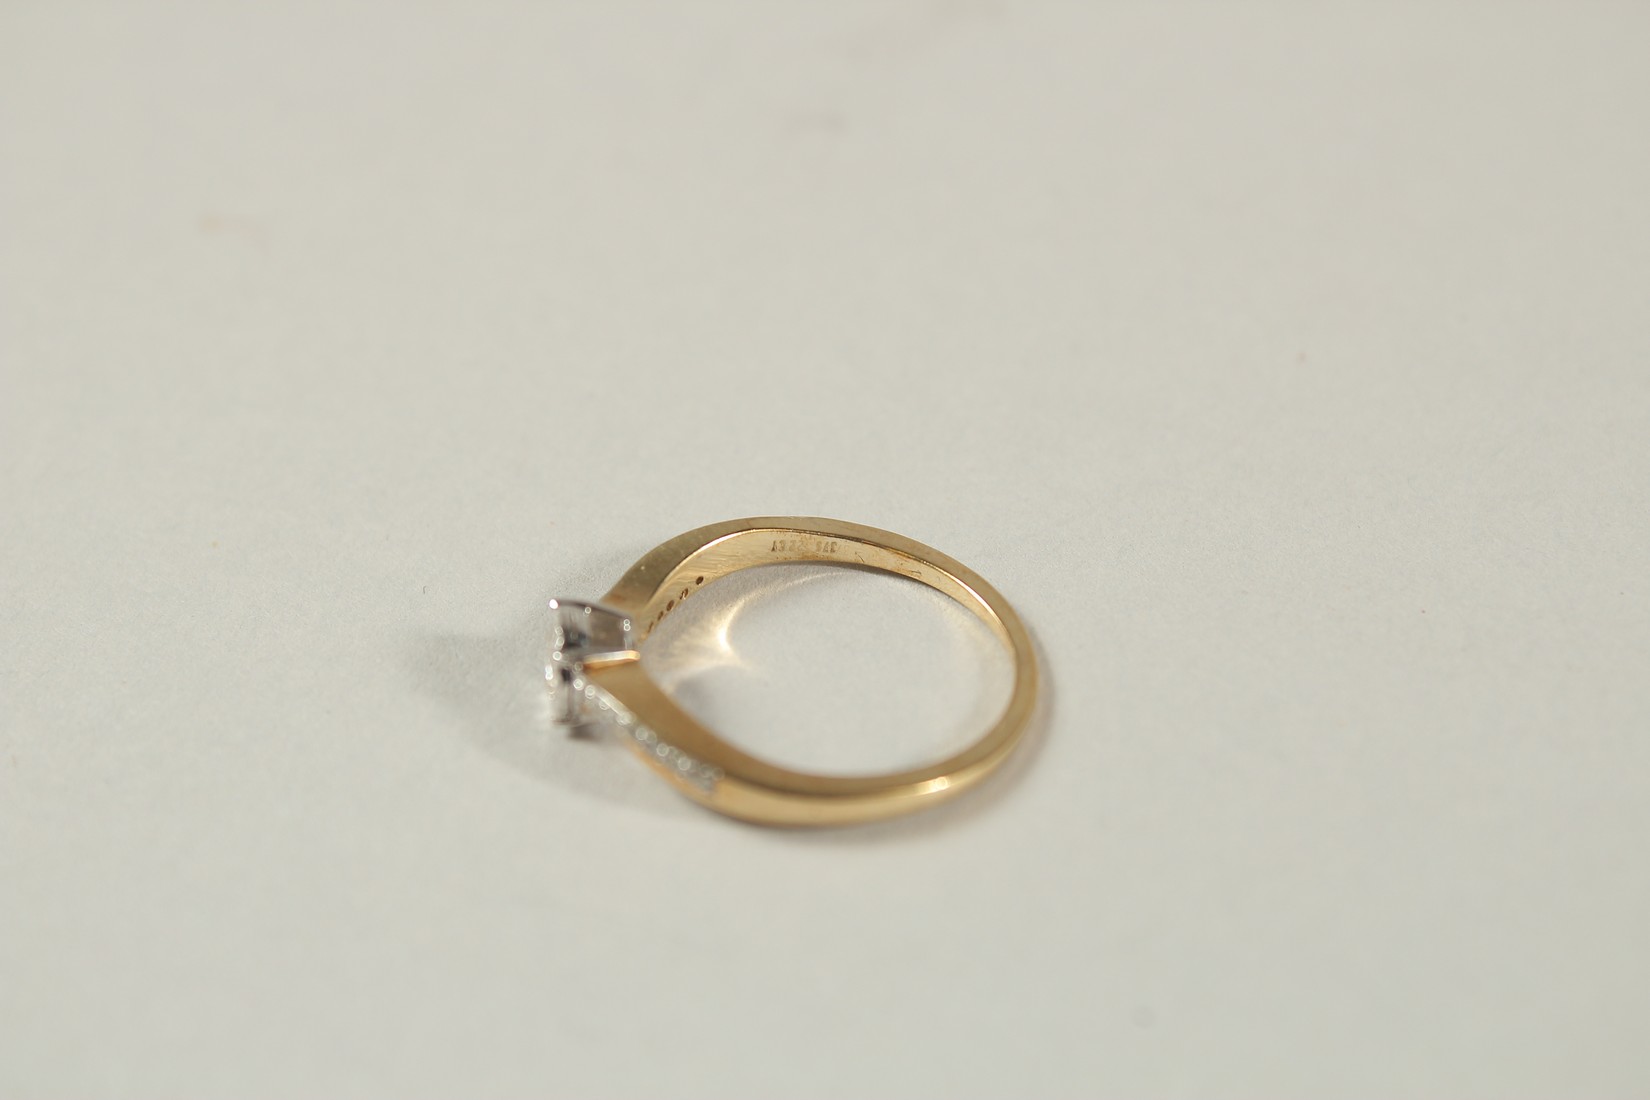 A 9CT YELLOW GOLD SOLITAIRE-STYLE RING SET WITH 0.22 RBC DIAMONDS IN TOTAL, in a twist-style - Image 4 of 5